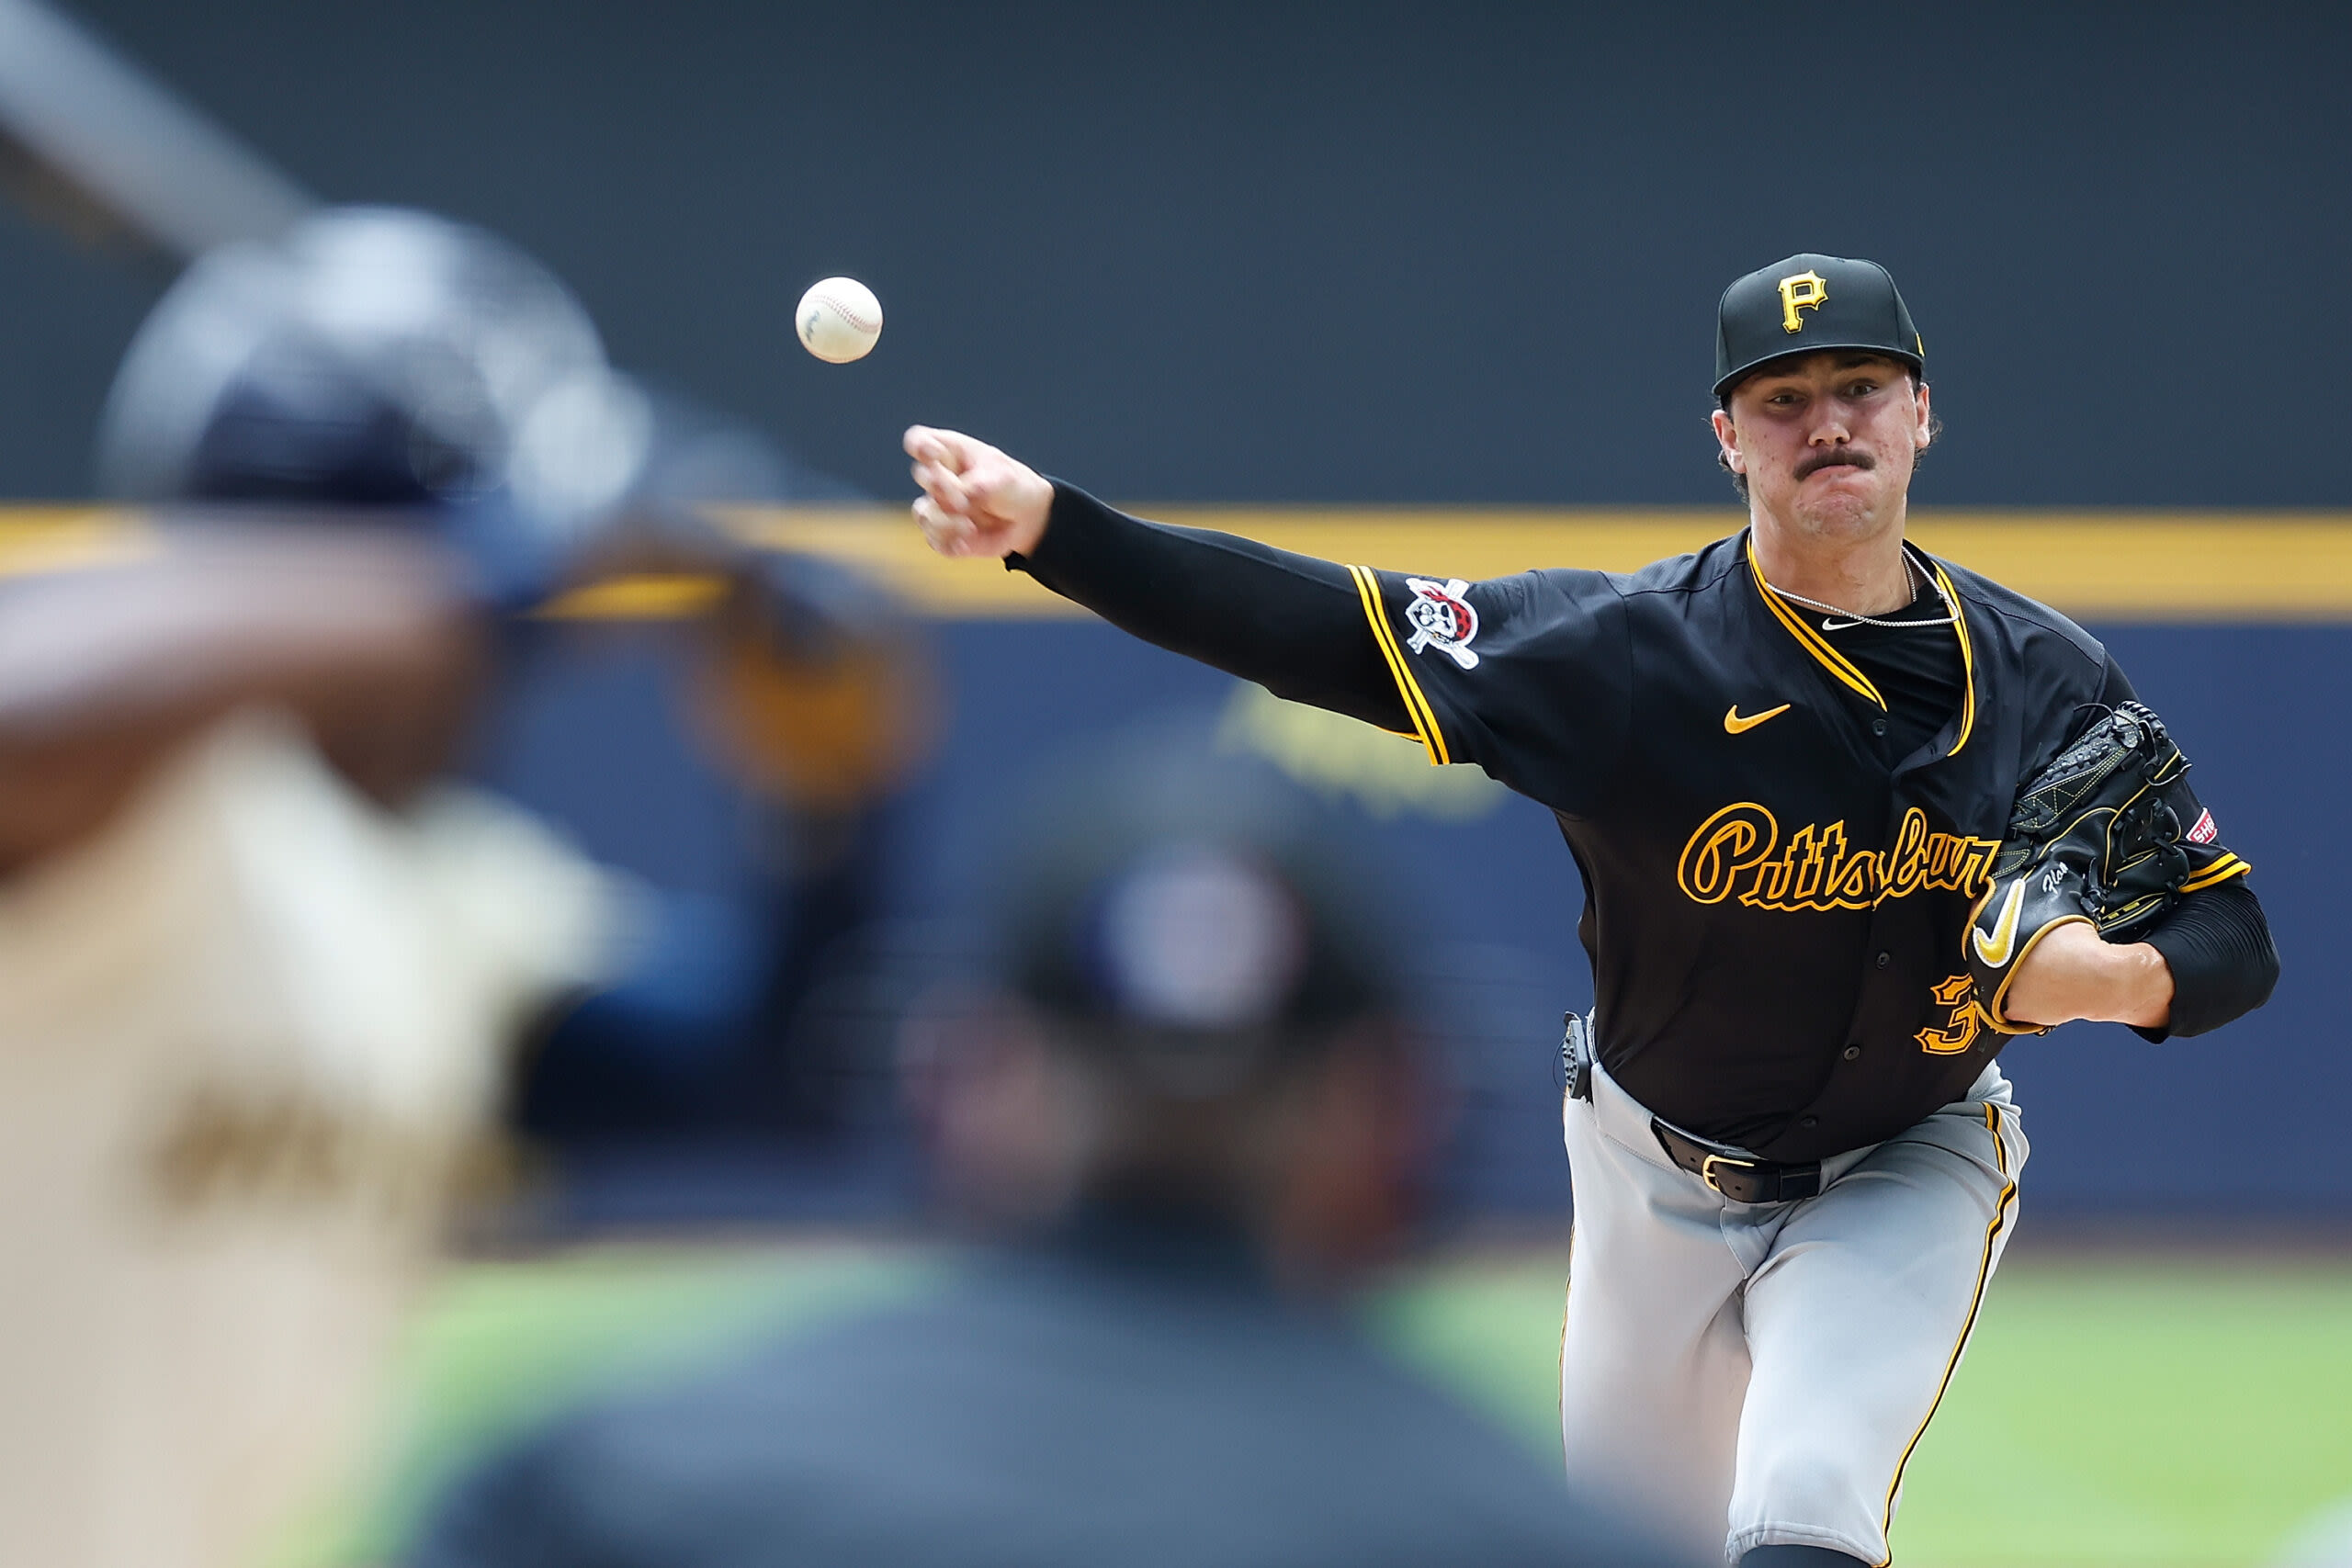 Paul Skenes nearly throws a no-hitter in another fantastic start for Pirates